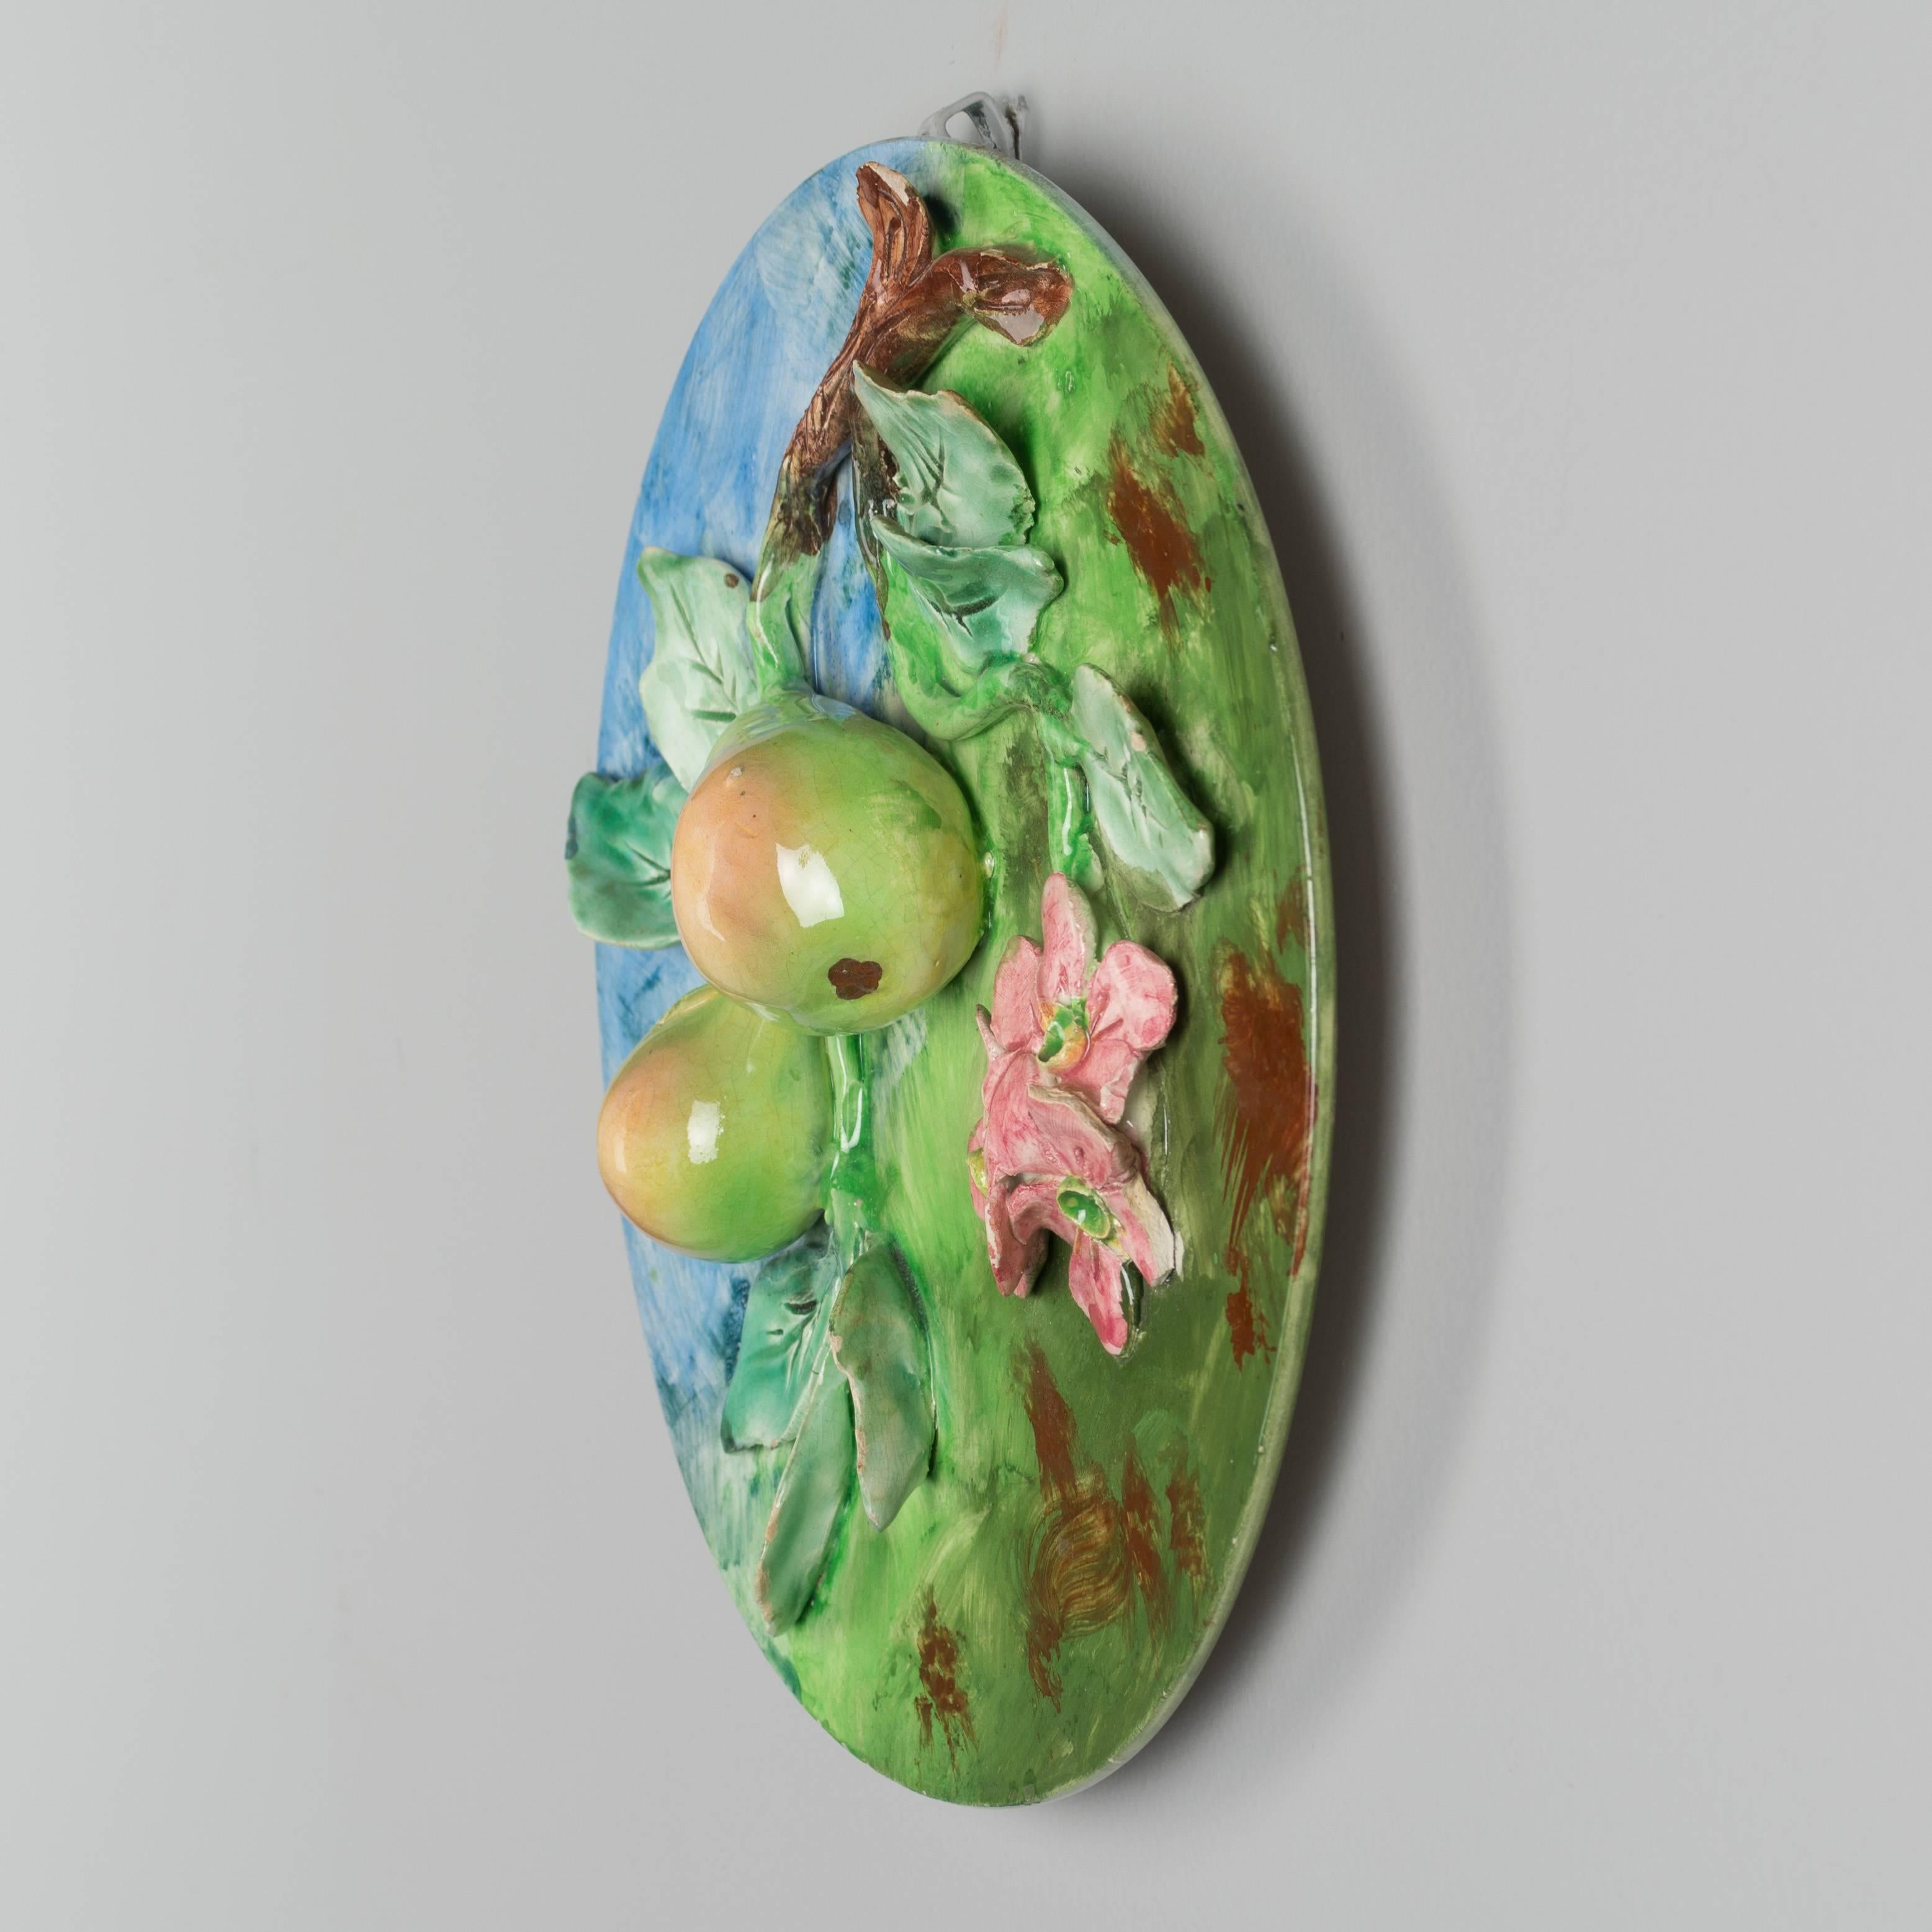 Hand-Crafted French majolica or Barbotine Wall Platter with Pears